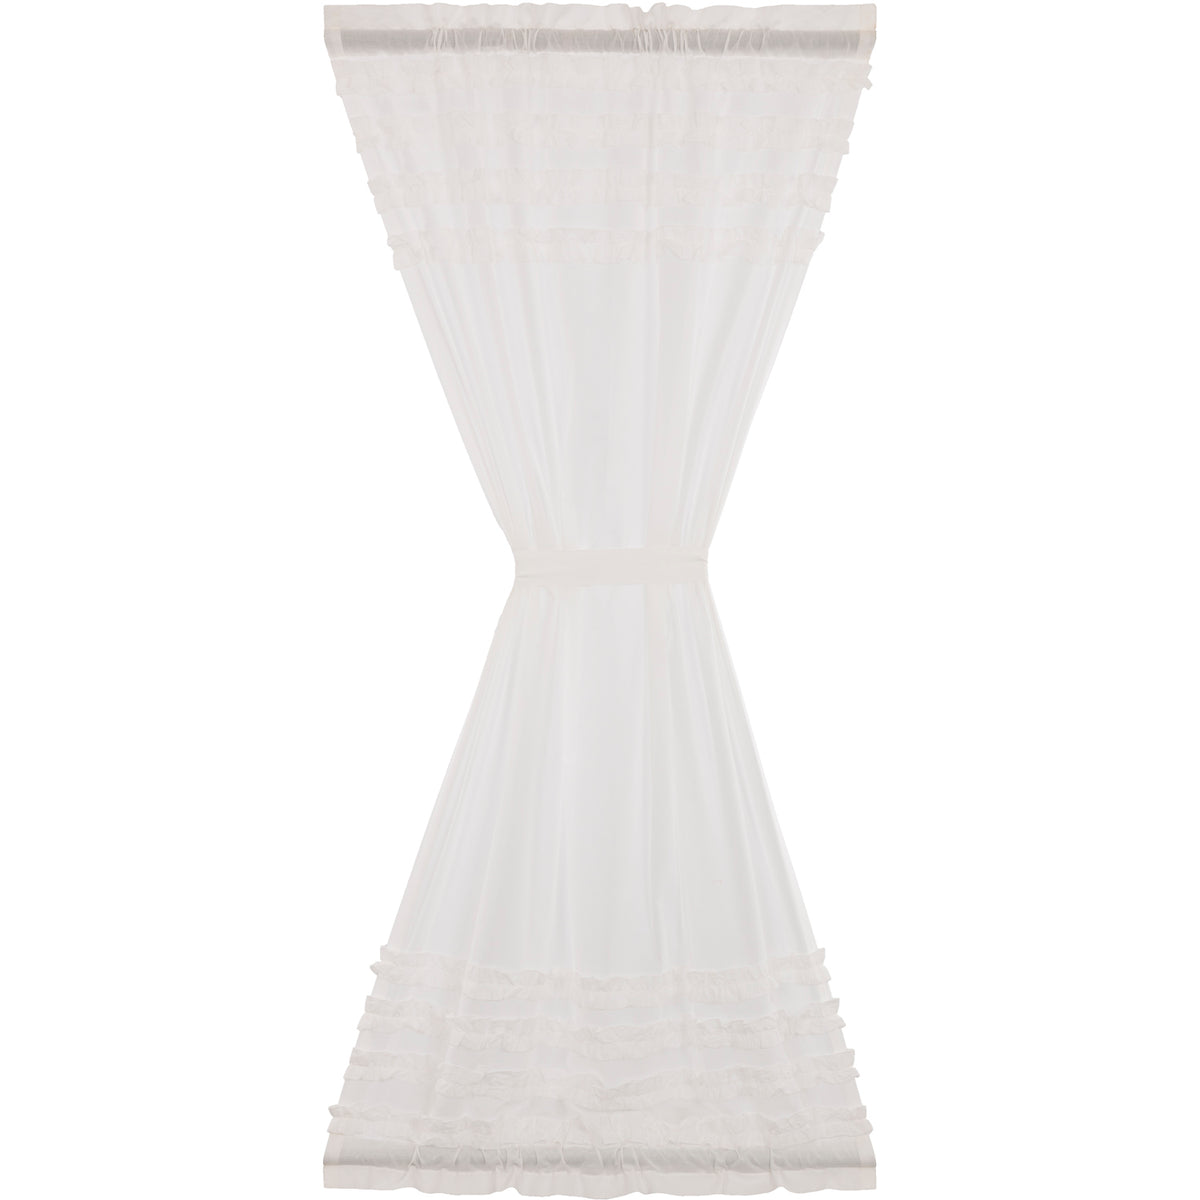 April & Olive White Ruffled Sheer Petticoat Door Panel 72x40 By VHC Brands